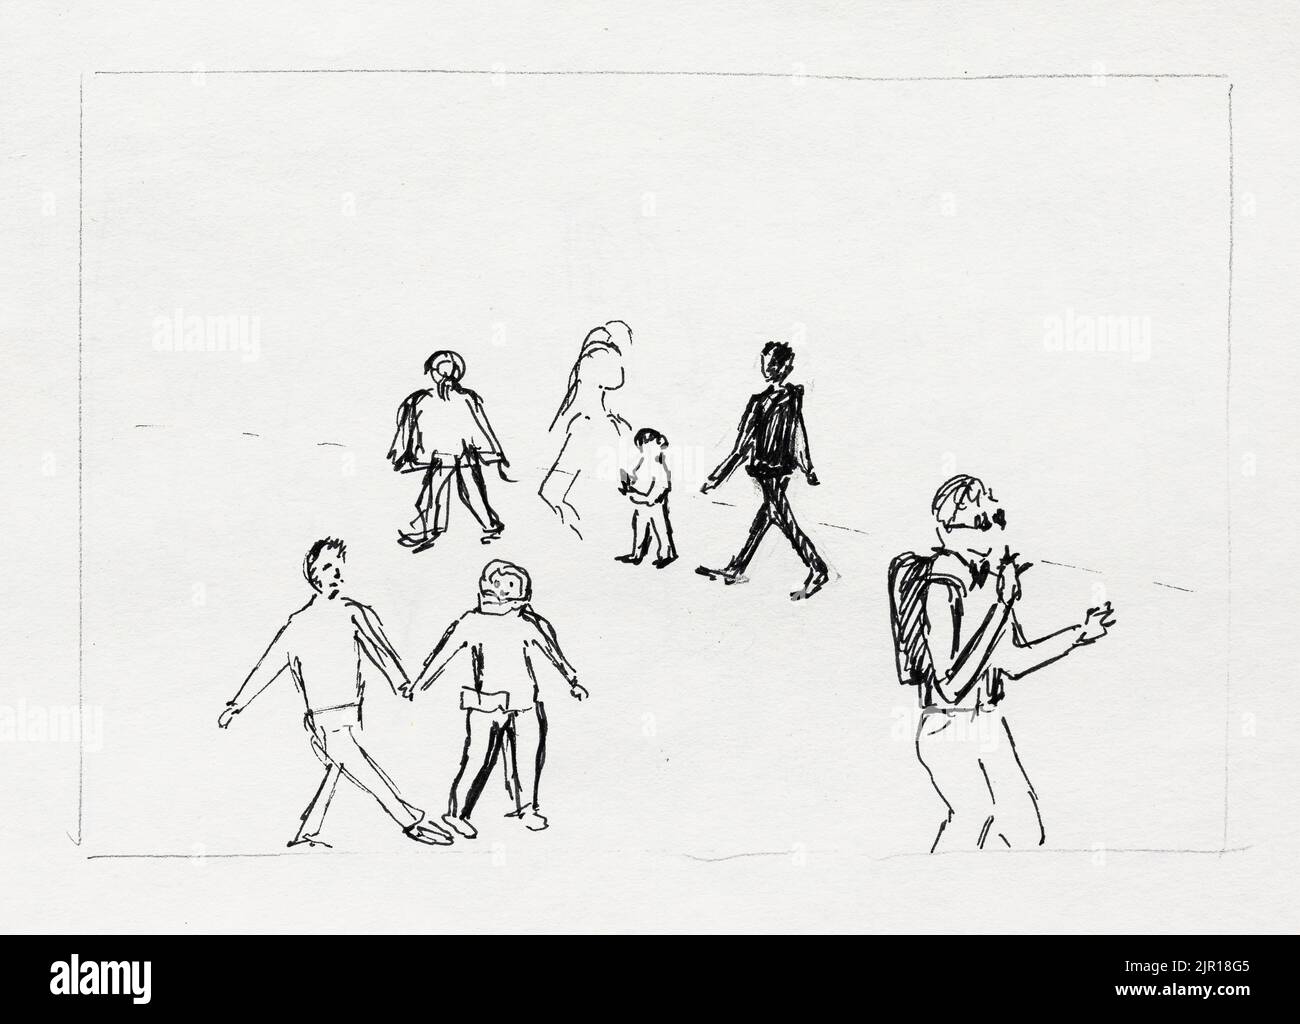 hand-drawn sketch of groups of walking people by black pen on old textured paper Stock Photo